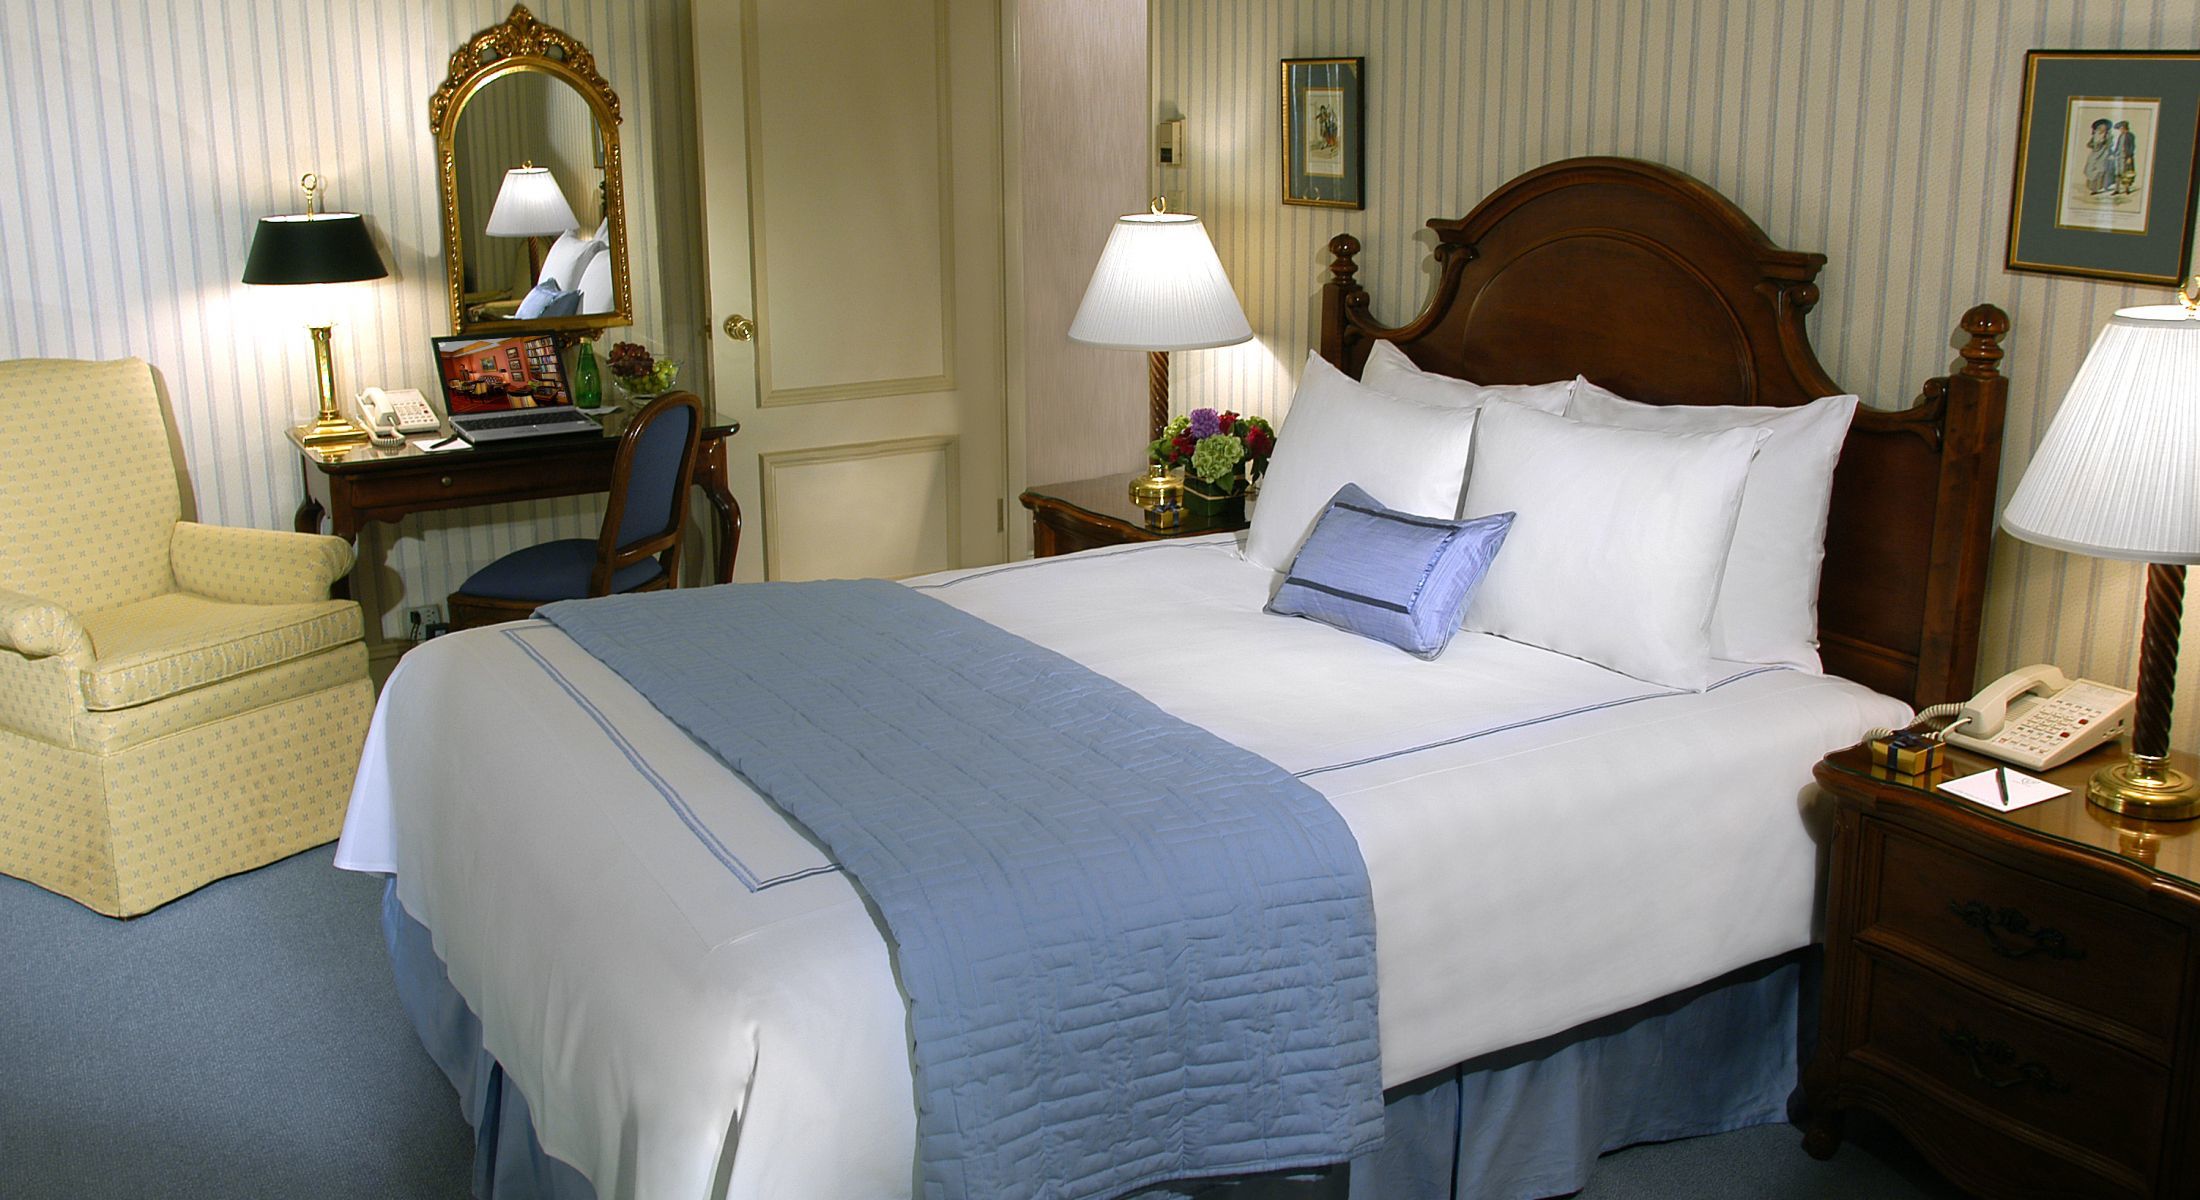 Our Deluxe Accessible Queen rooms are perfect for 1-2 guests and are ADA compliant